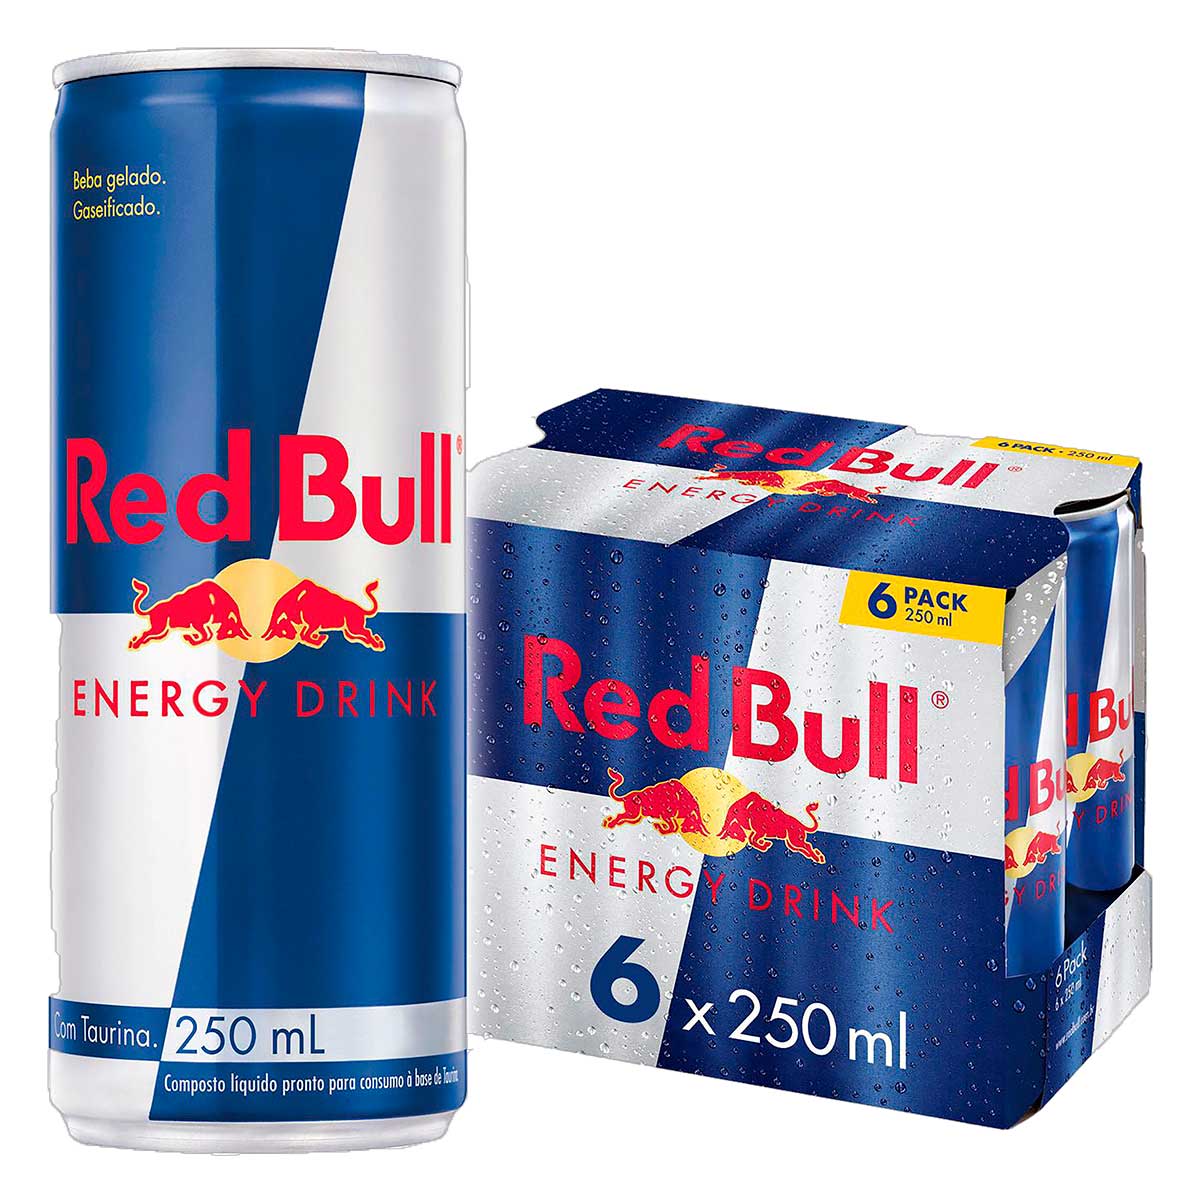 whisky-old-parr-1l---energetico-red-bull-energy-drink-250ml-pack-com-6-unidades-4.jpg